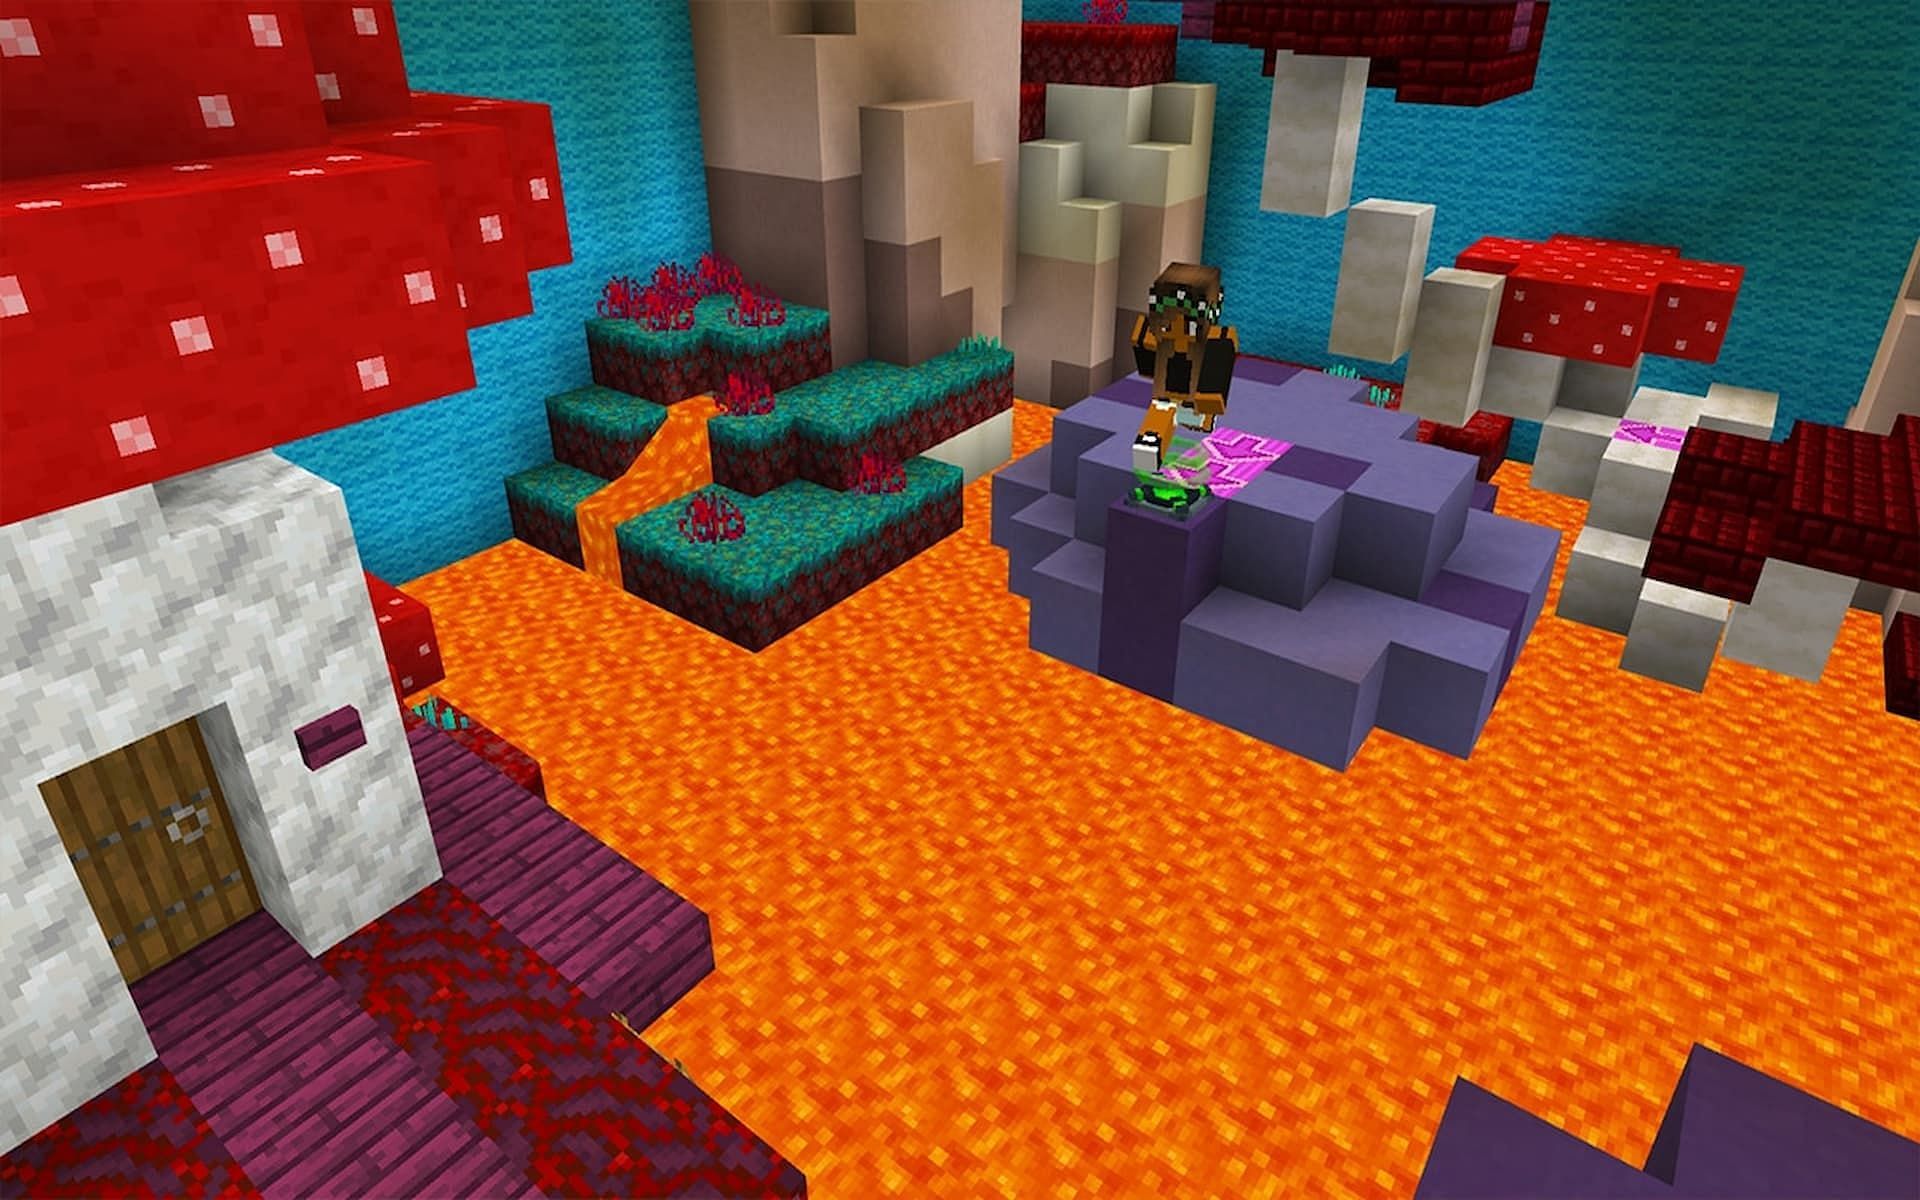 Parkour maps let Minecraft players put their jumping skills to the test (Image via Minecraft.net)